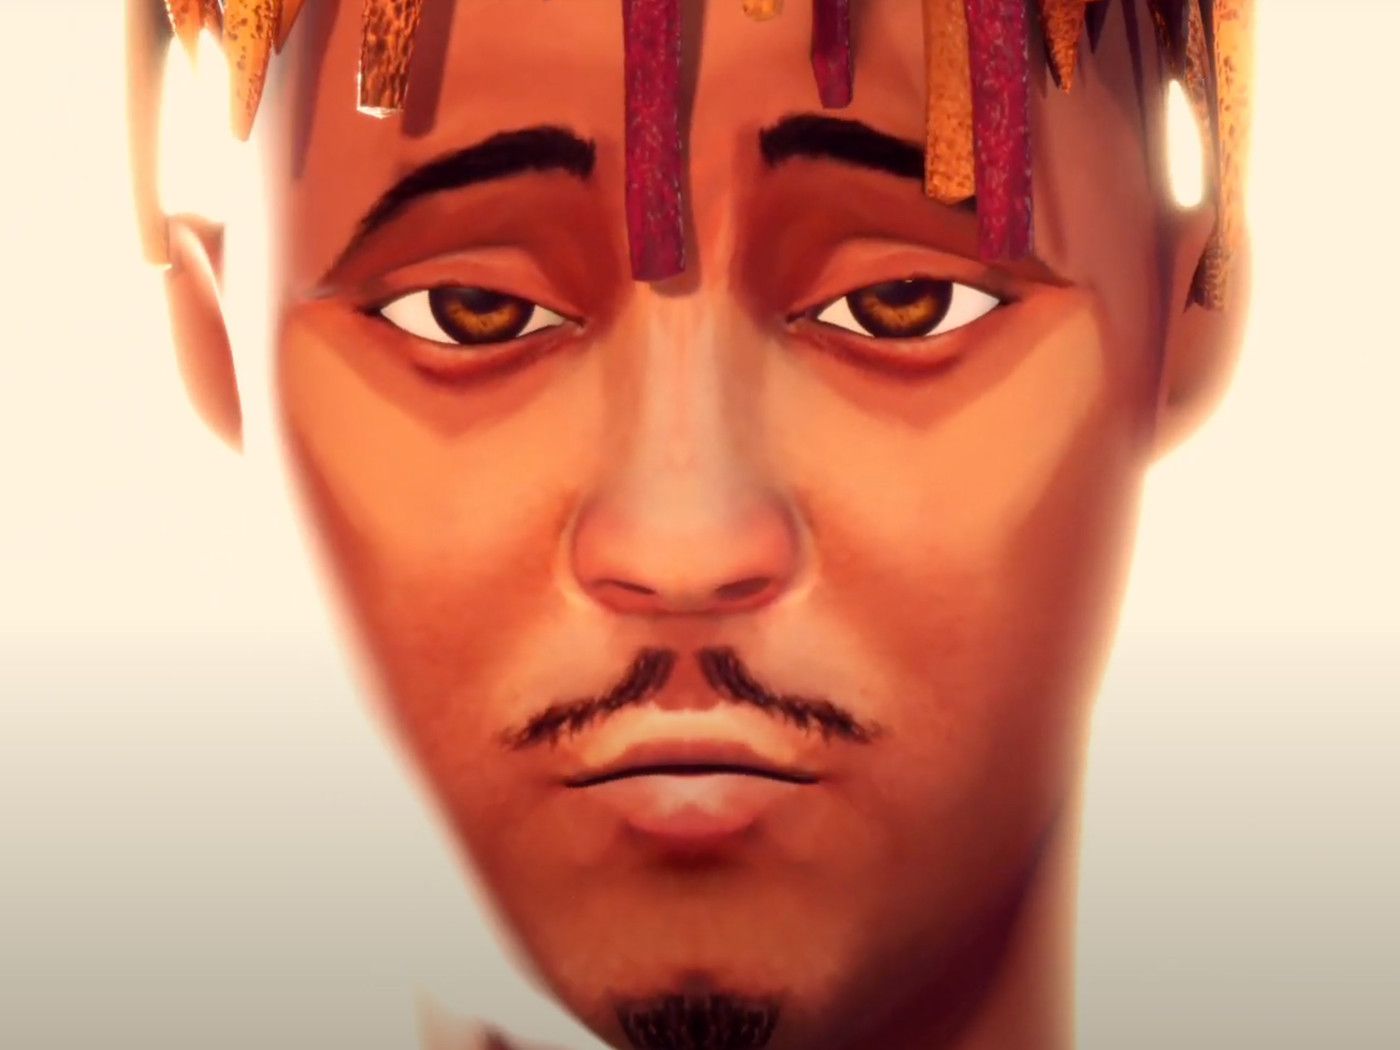 Watch Juice WRLD and The Weeknd's animated visual for “Smile”